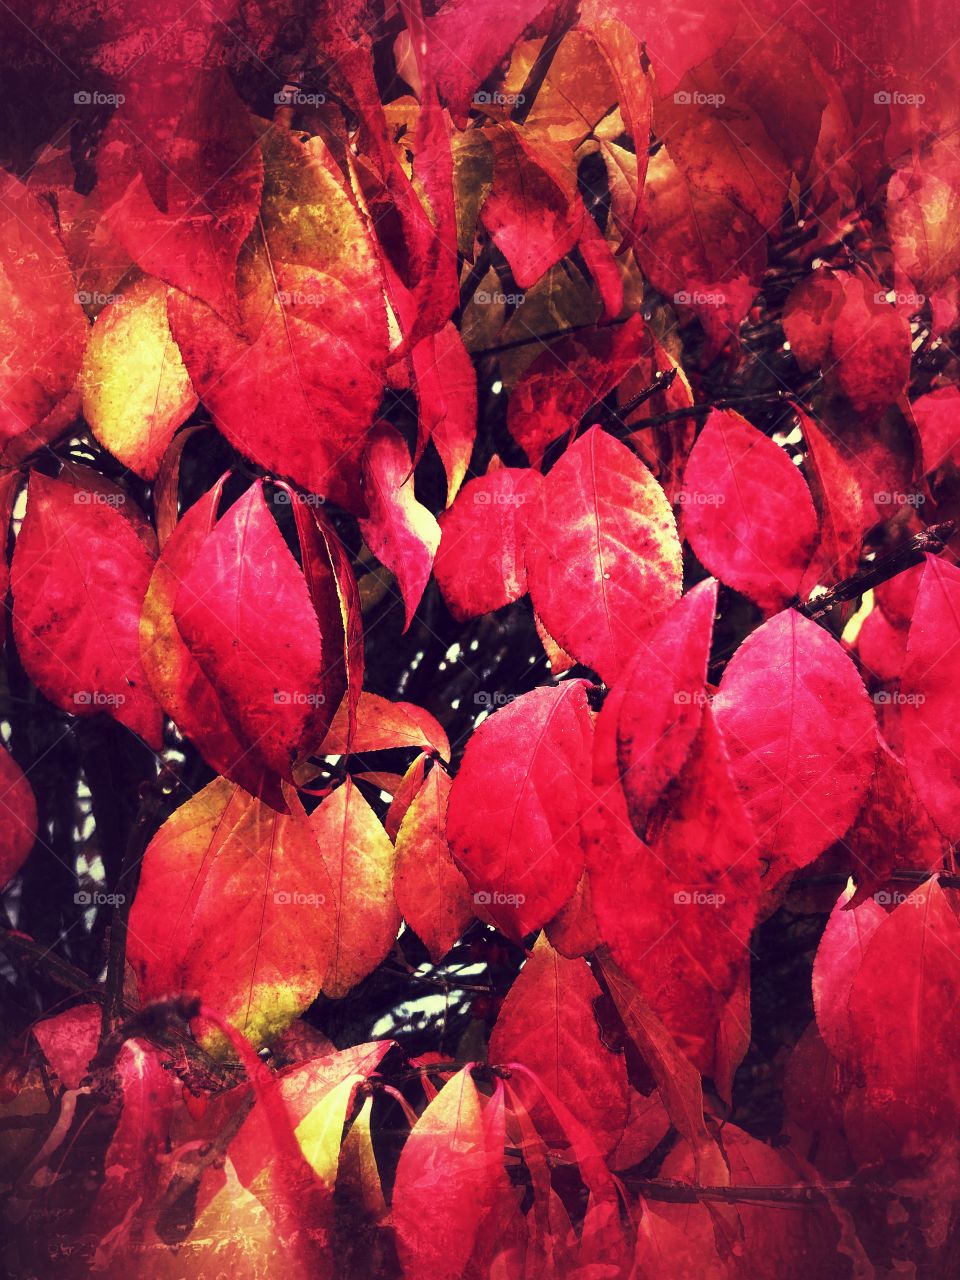 Fall leaves on the fire bush are so vibrant red and bright in color. 